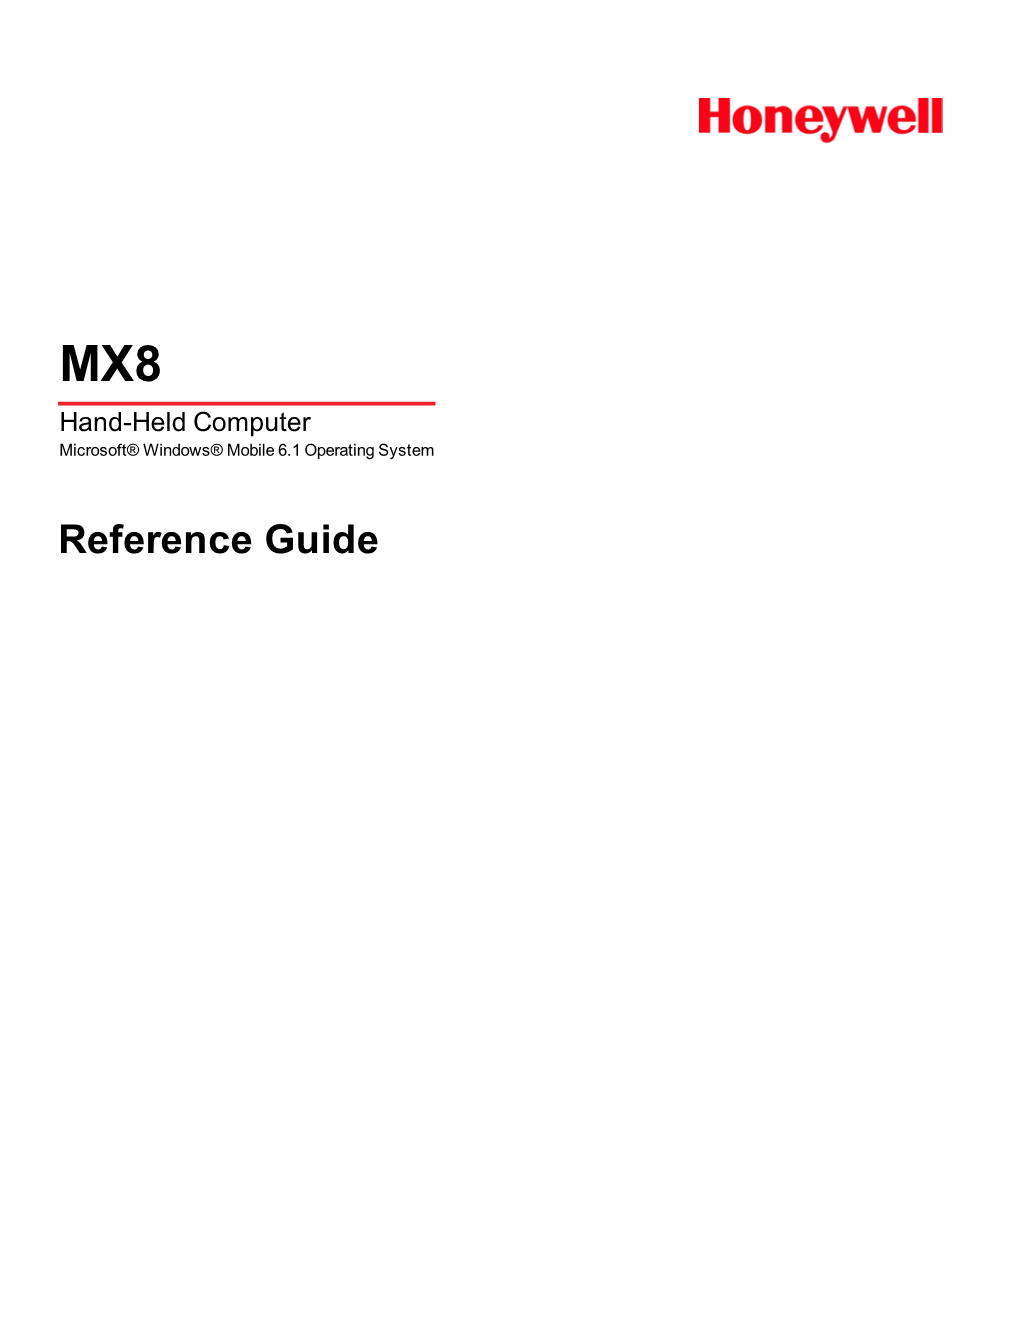 MX8 Reference Guide (Windows Mobile 6.1